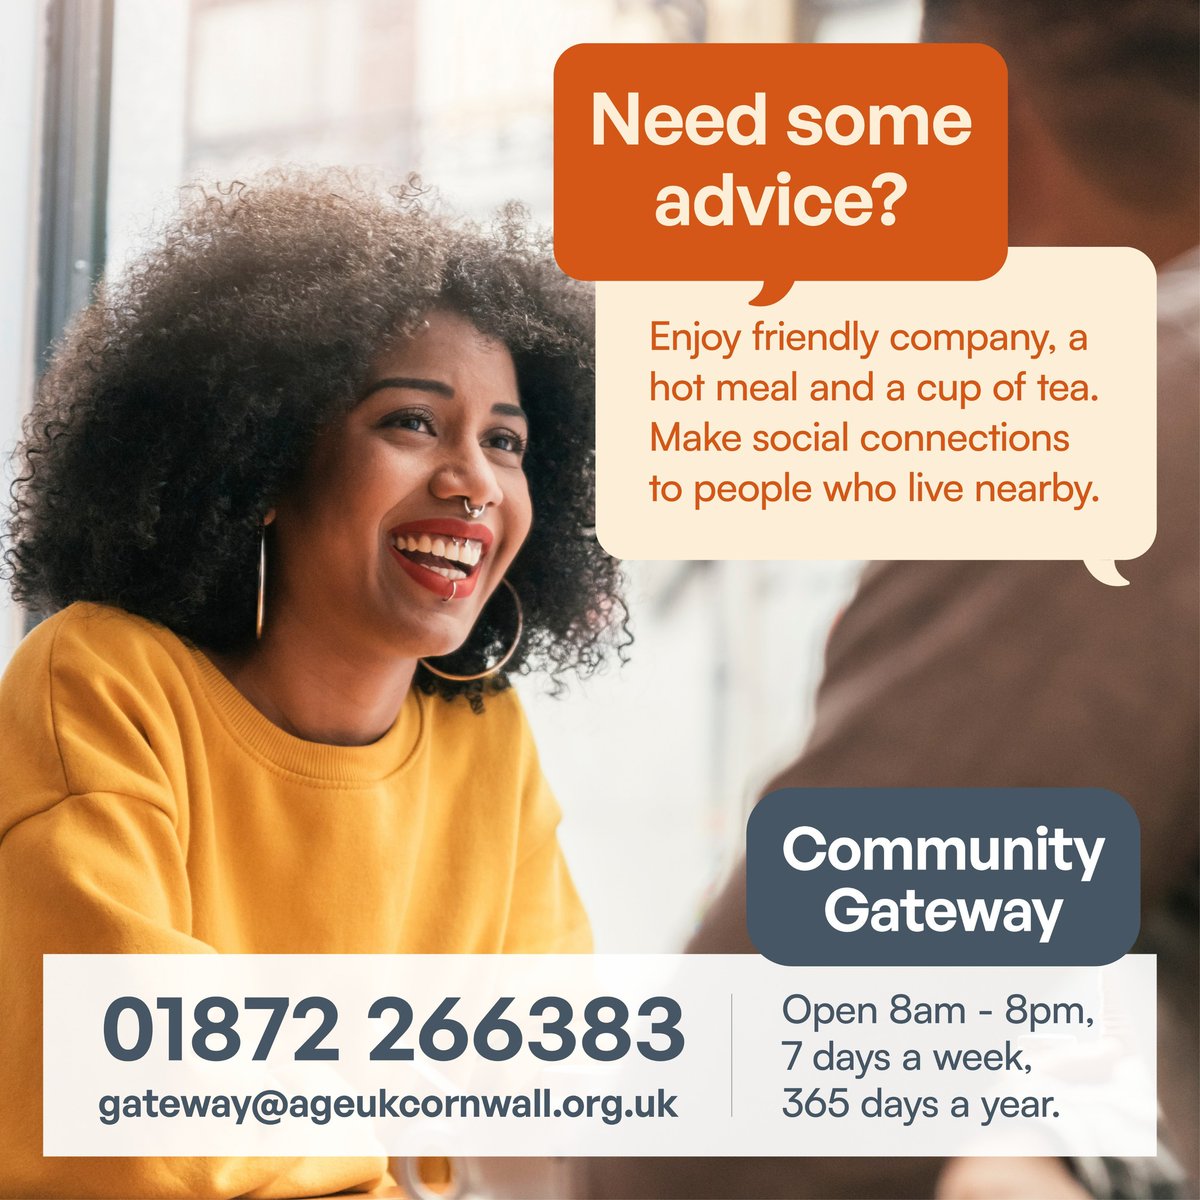 It's #MentalHealthAwarenessWeek! 💚 The Community Gateway received 2,425 calls in March, centring around the concerns of the cost of living, with the team actioning an impressive 95% of referrals. Find out more about this free community resource... ageuk.org.uk/cornwall/our-s…